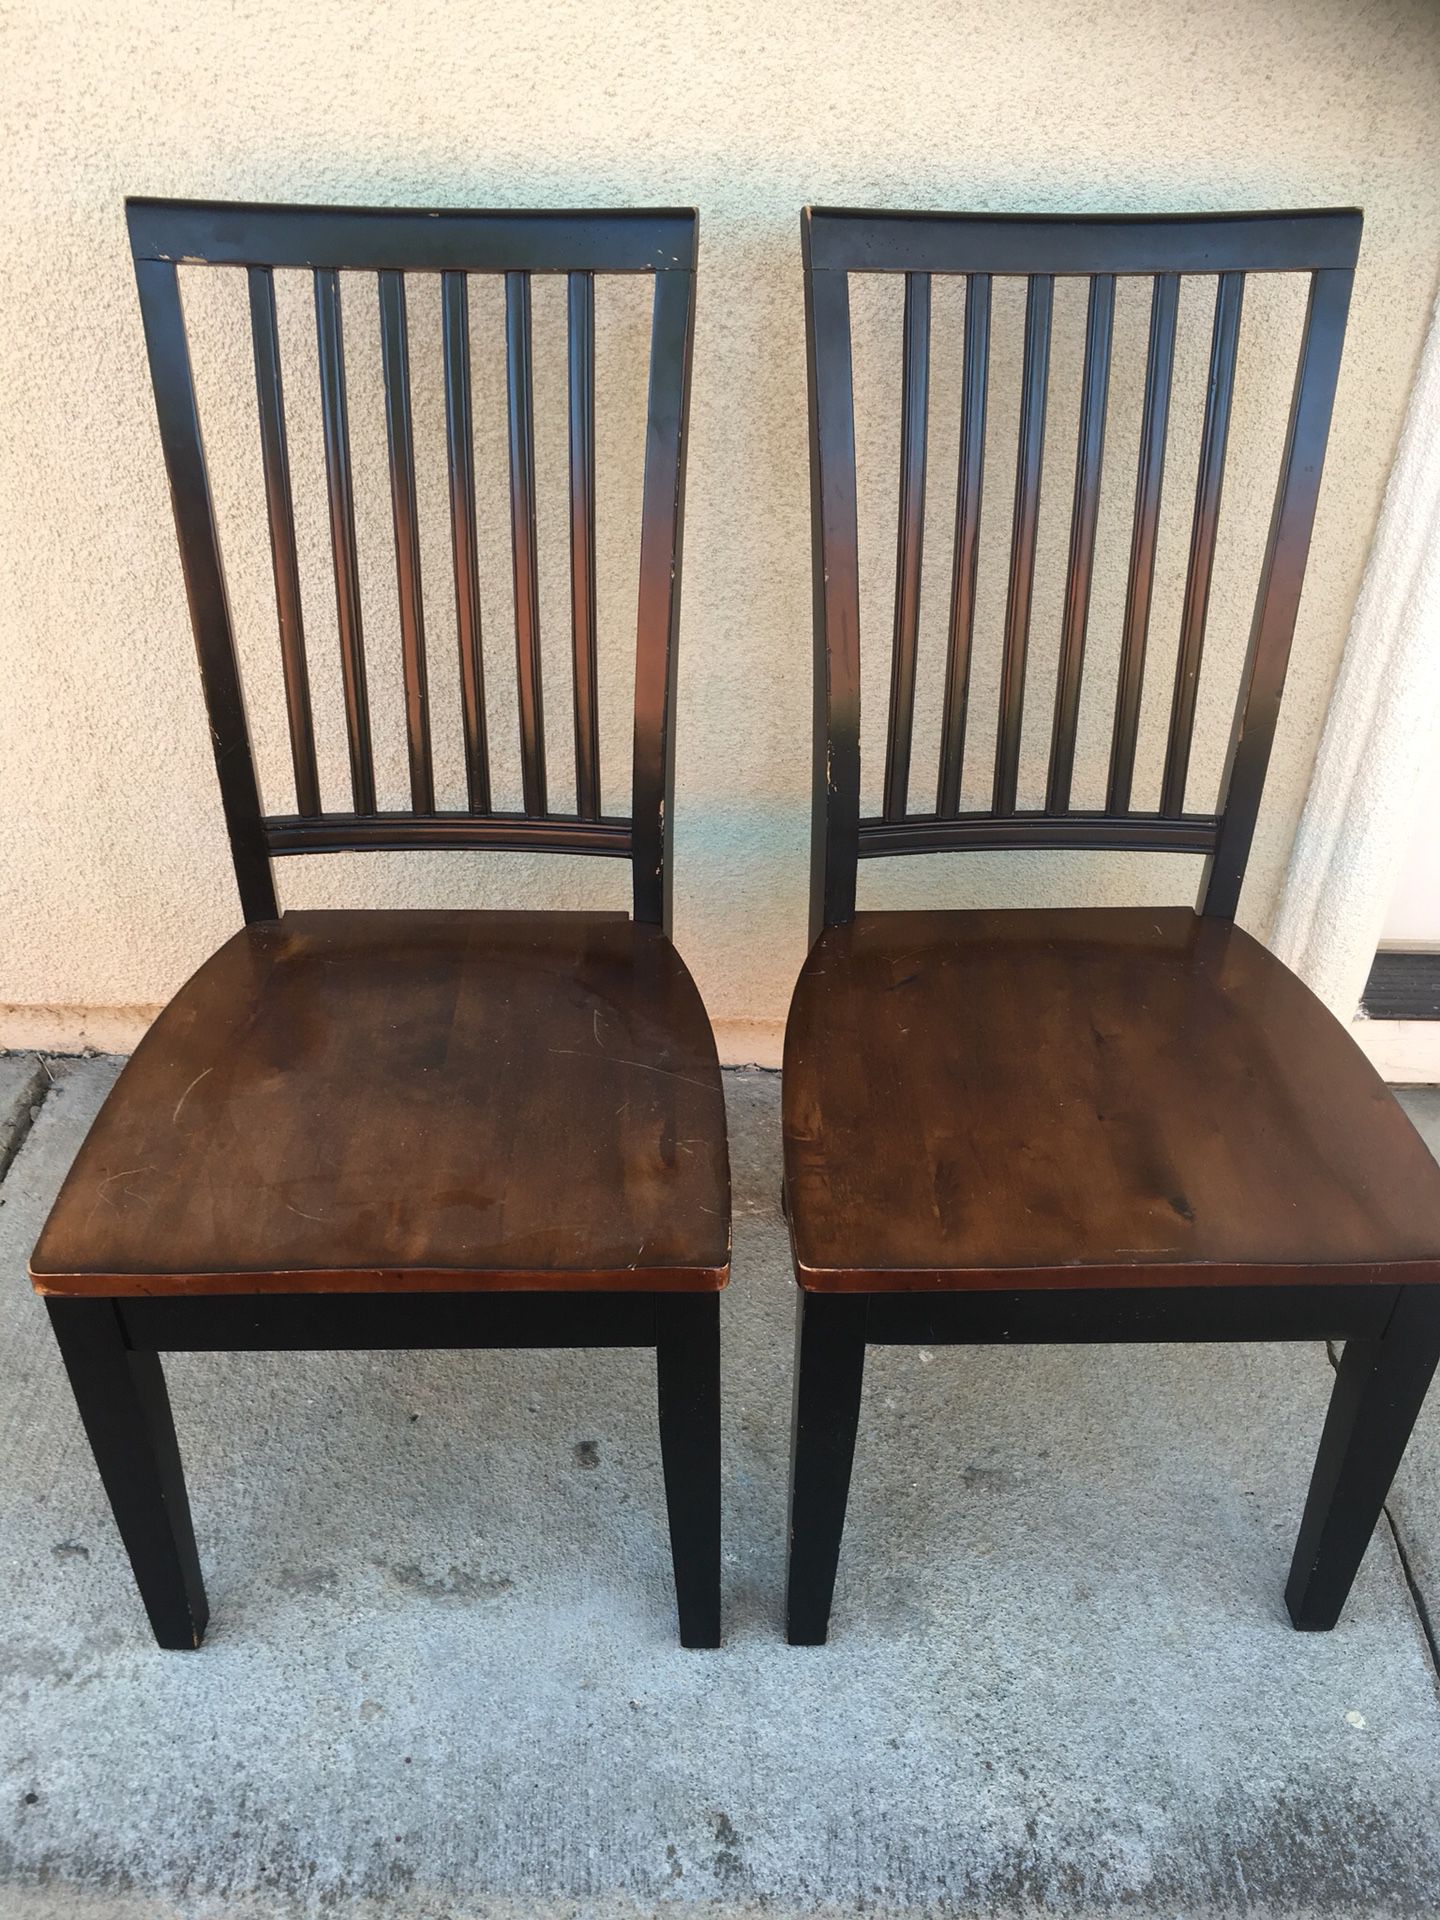 4 Solid Sturdy Wood Chairs